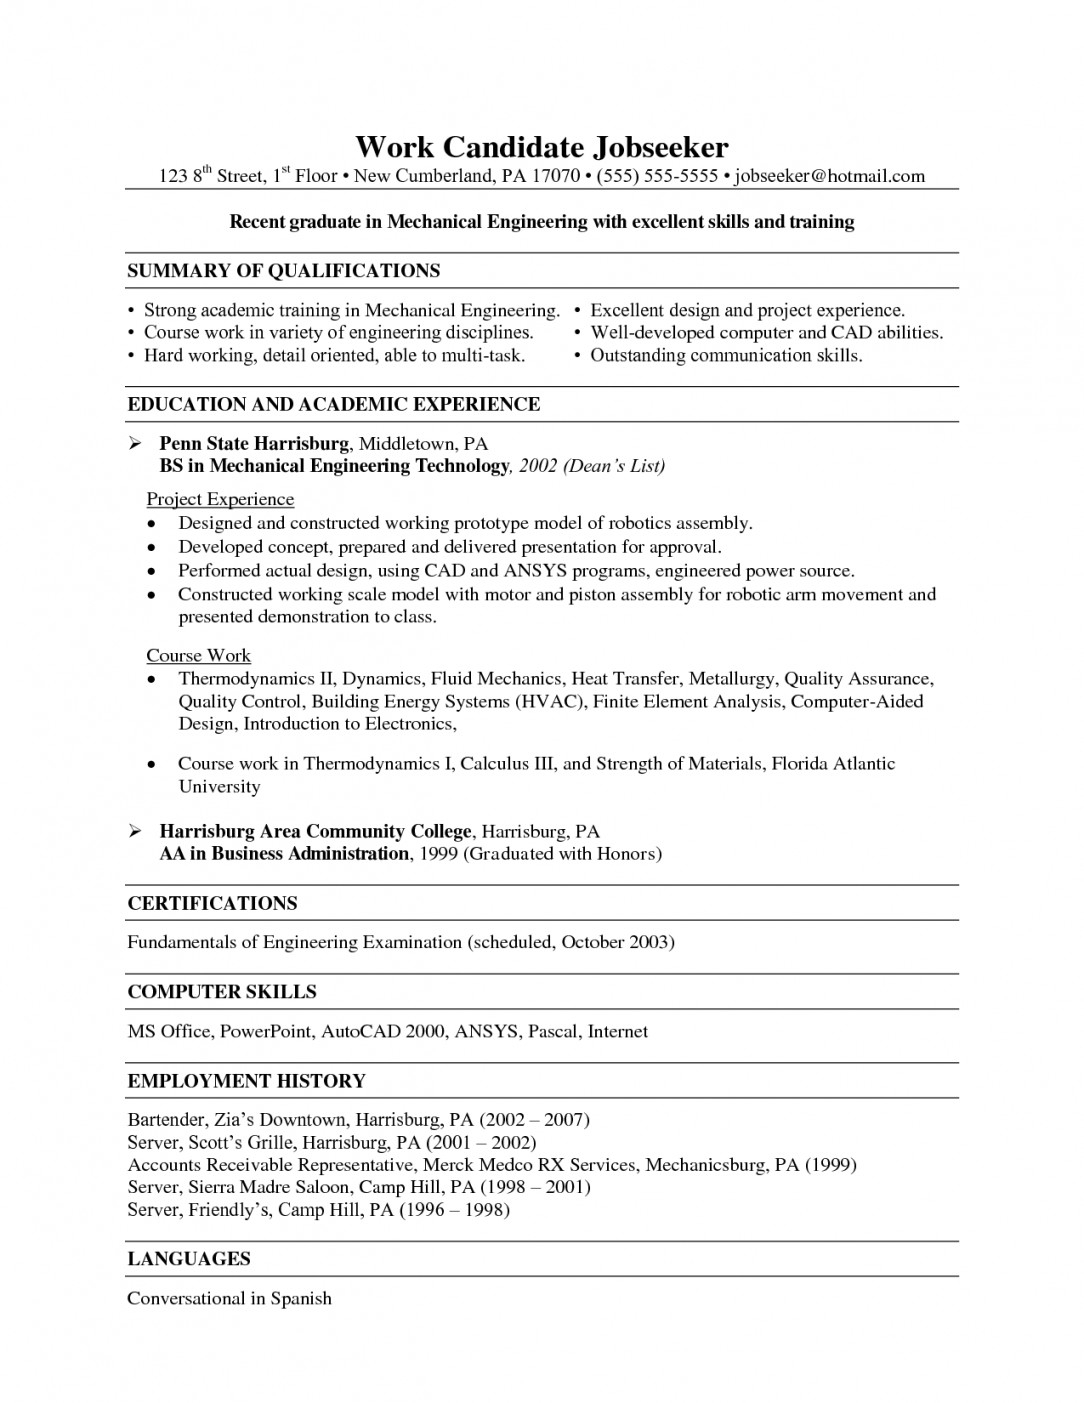 Mechanical Engineering Cover Letter Template - Diploma Mechanical Engineering Resume format Sradd